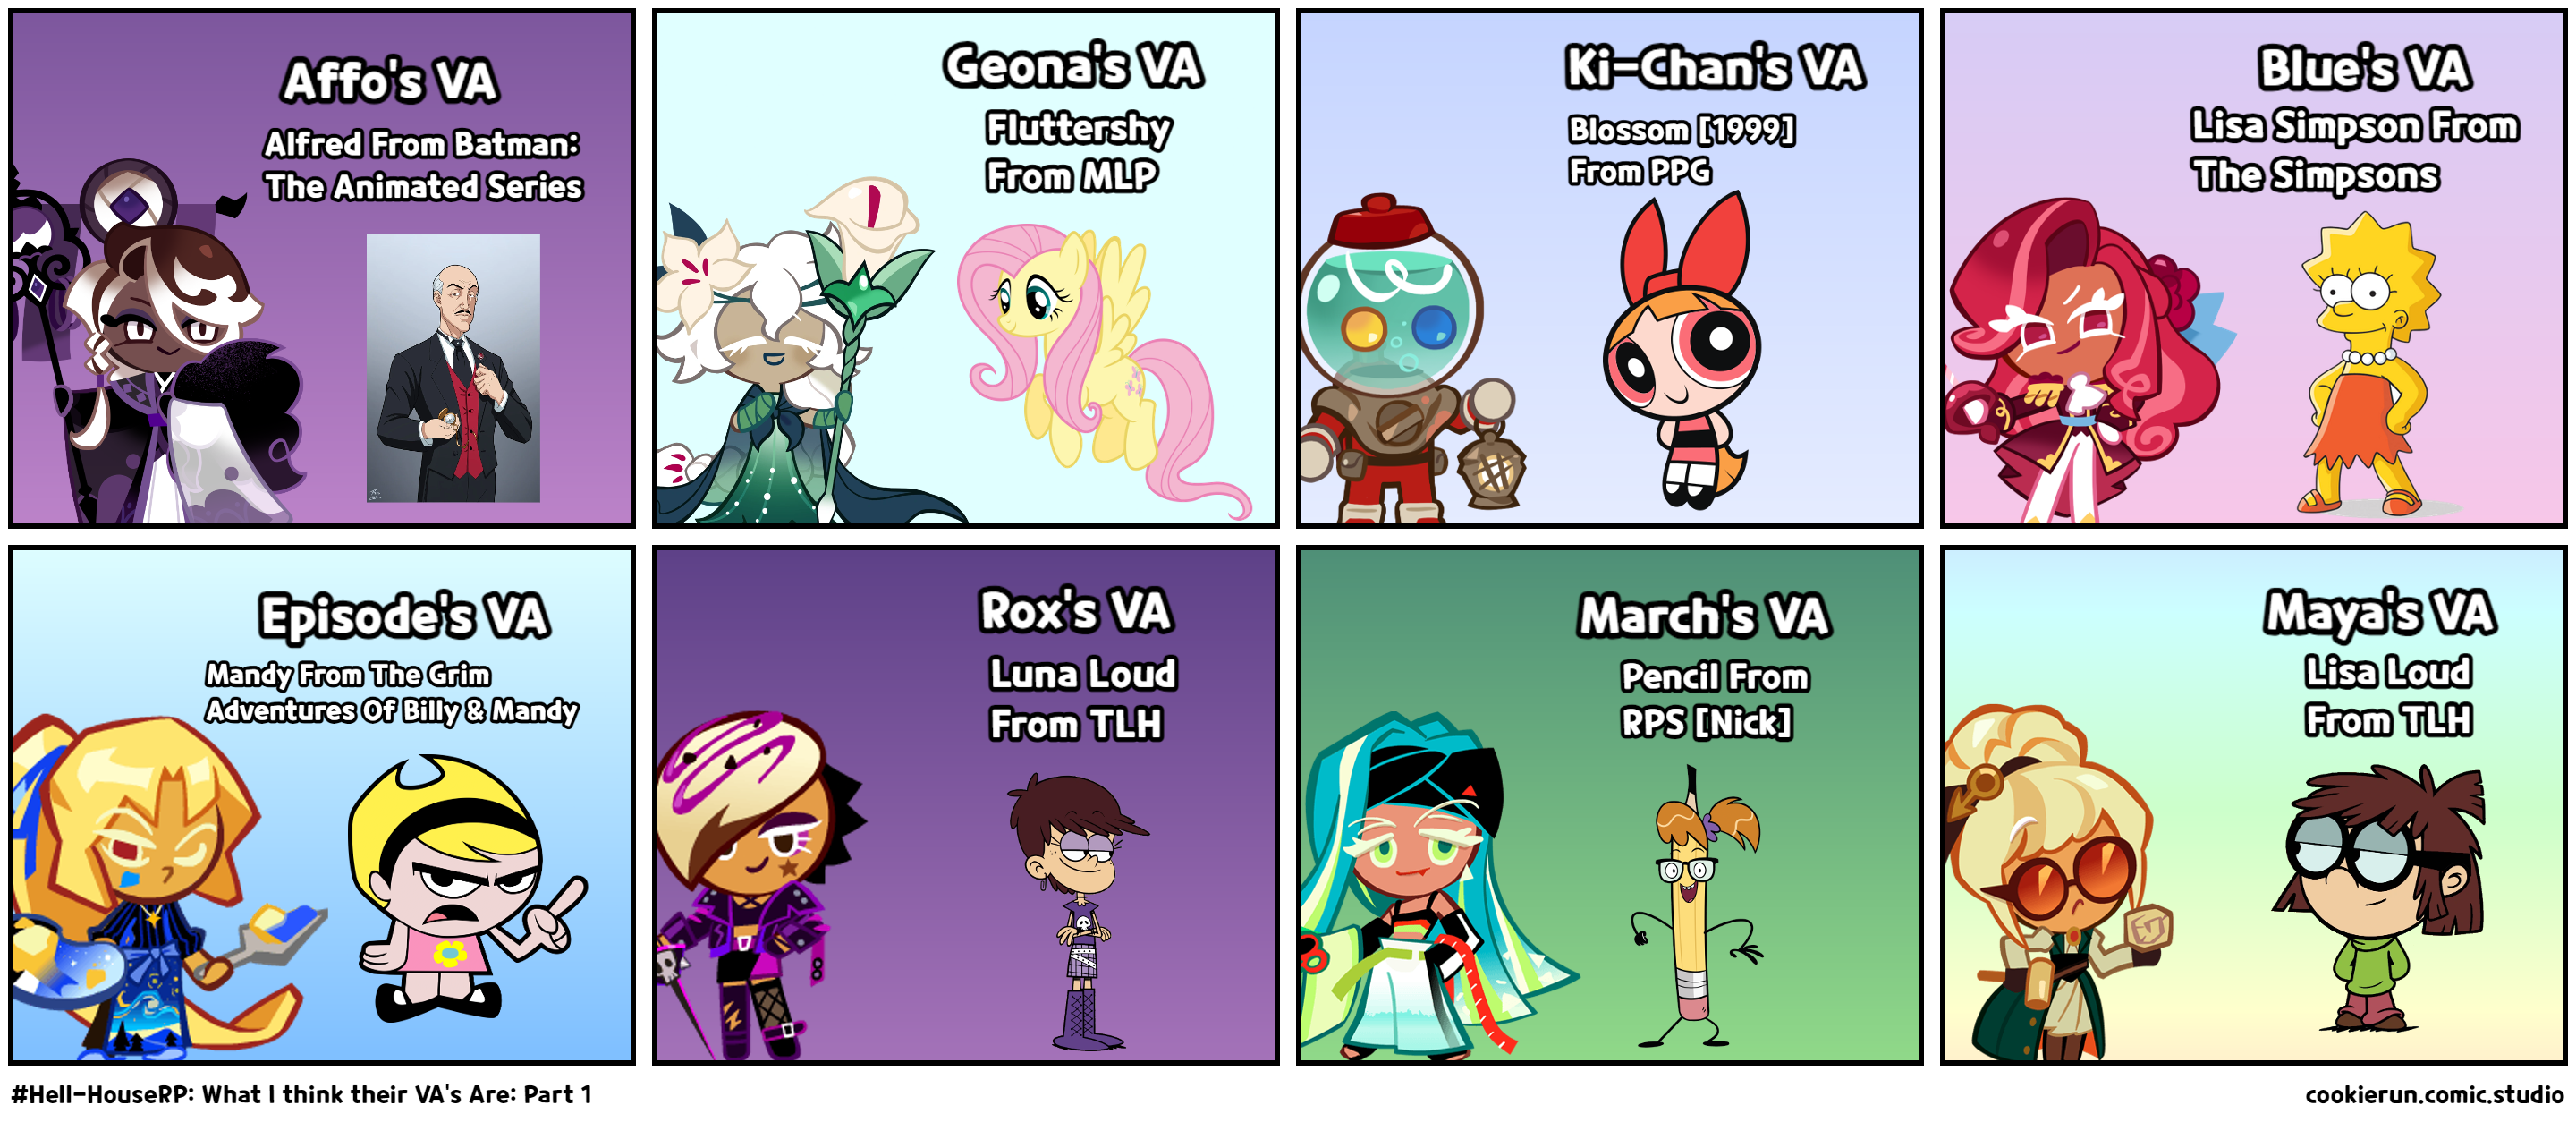 #Hell-HouseRP: What I think their VA's Are: Part 1